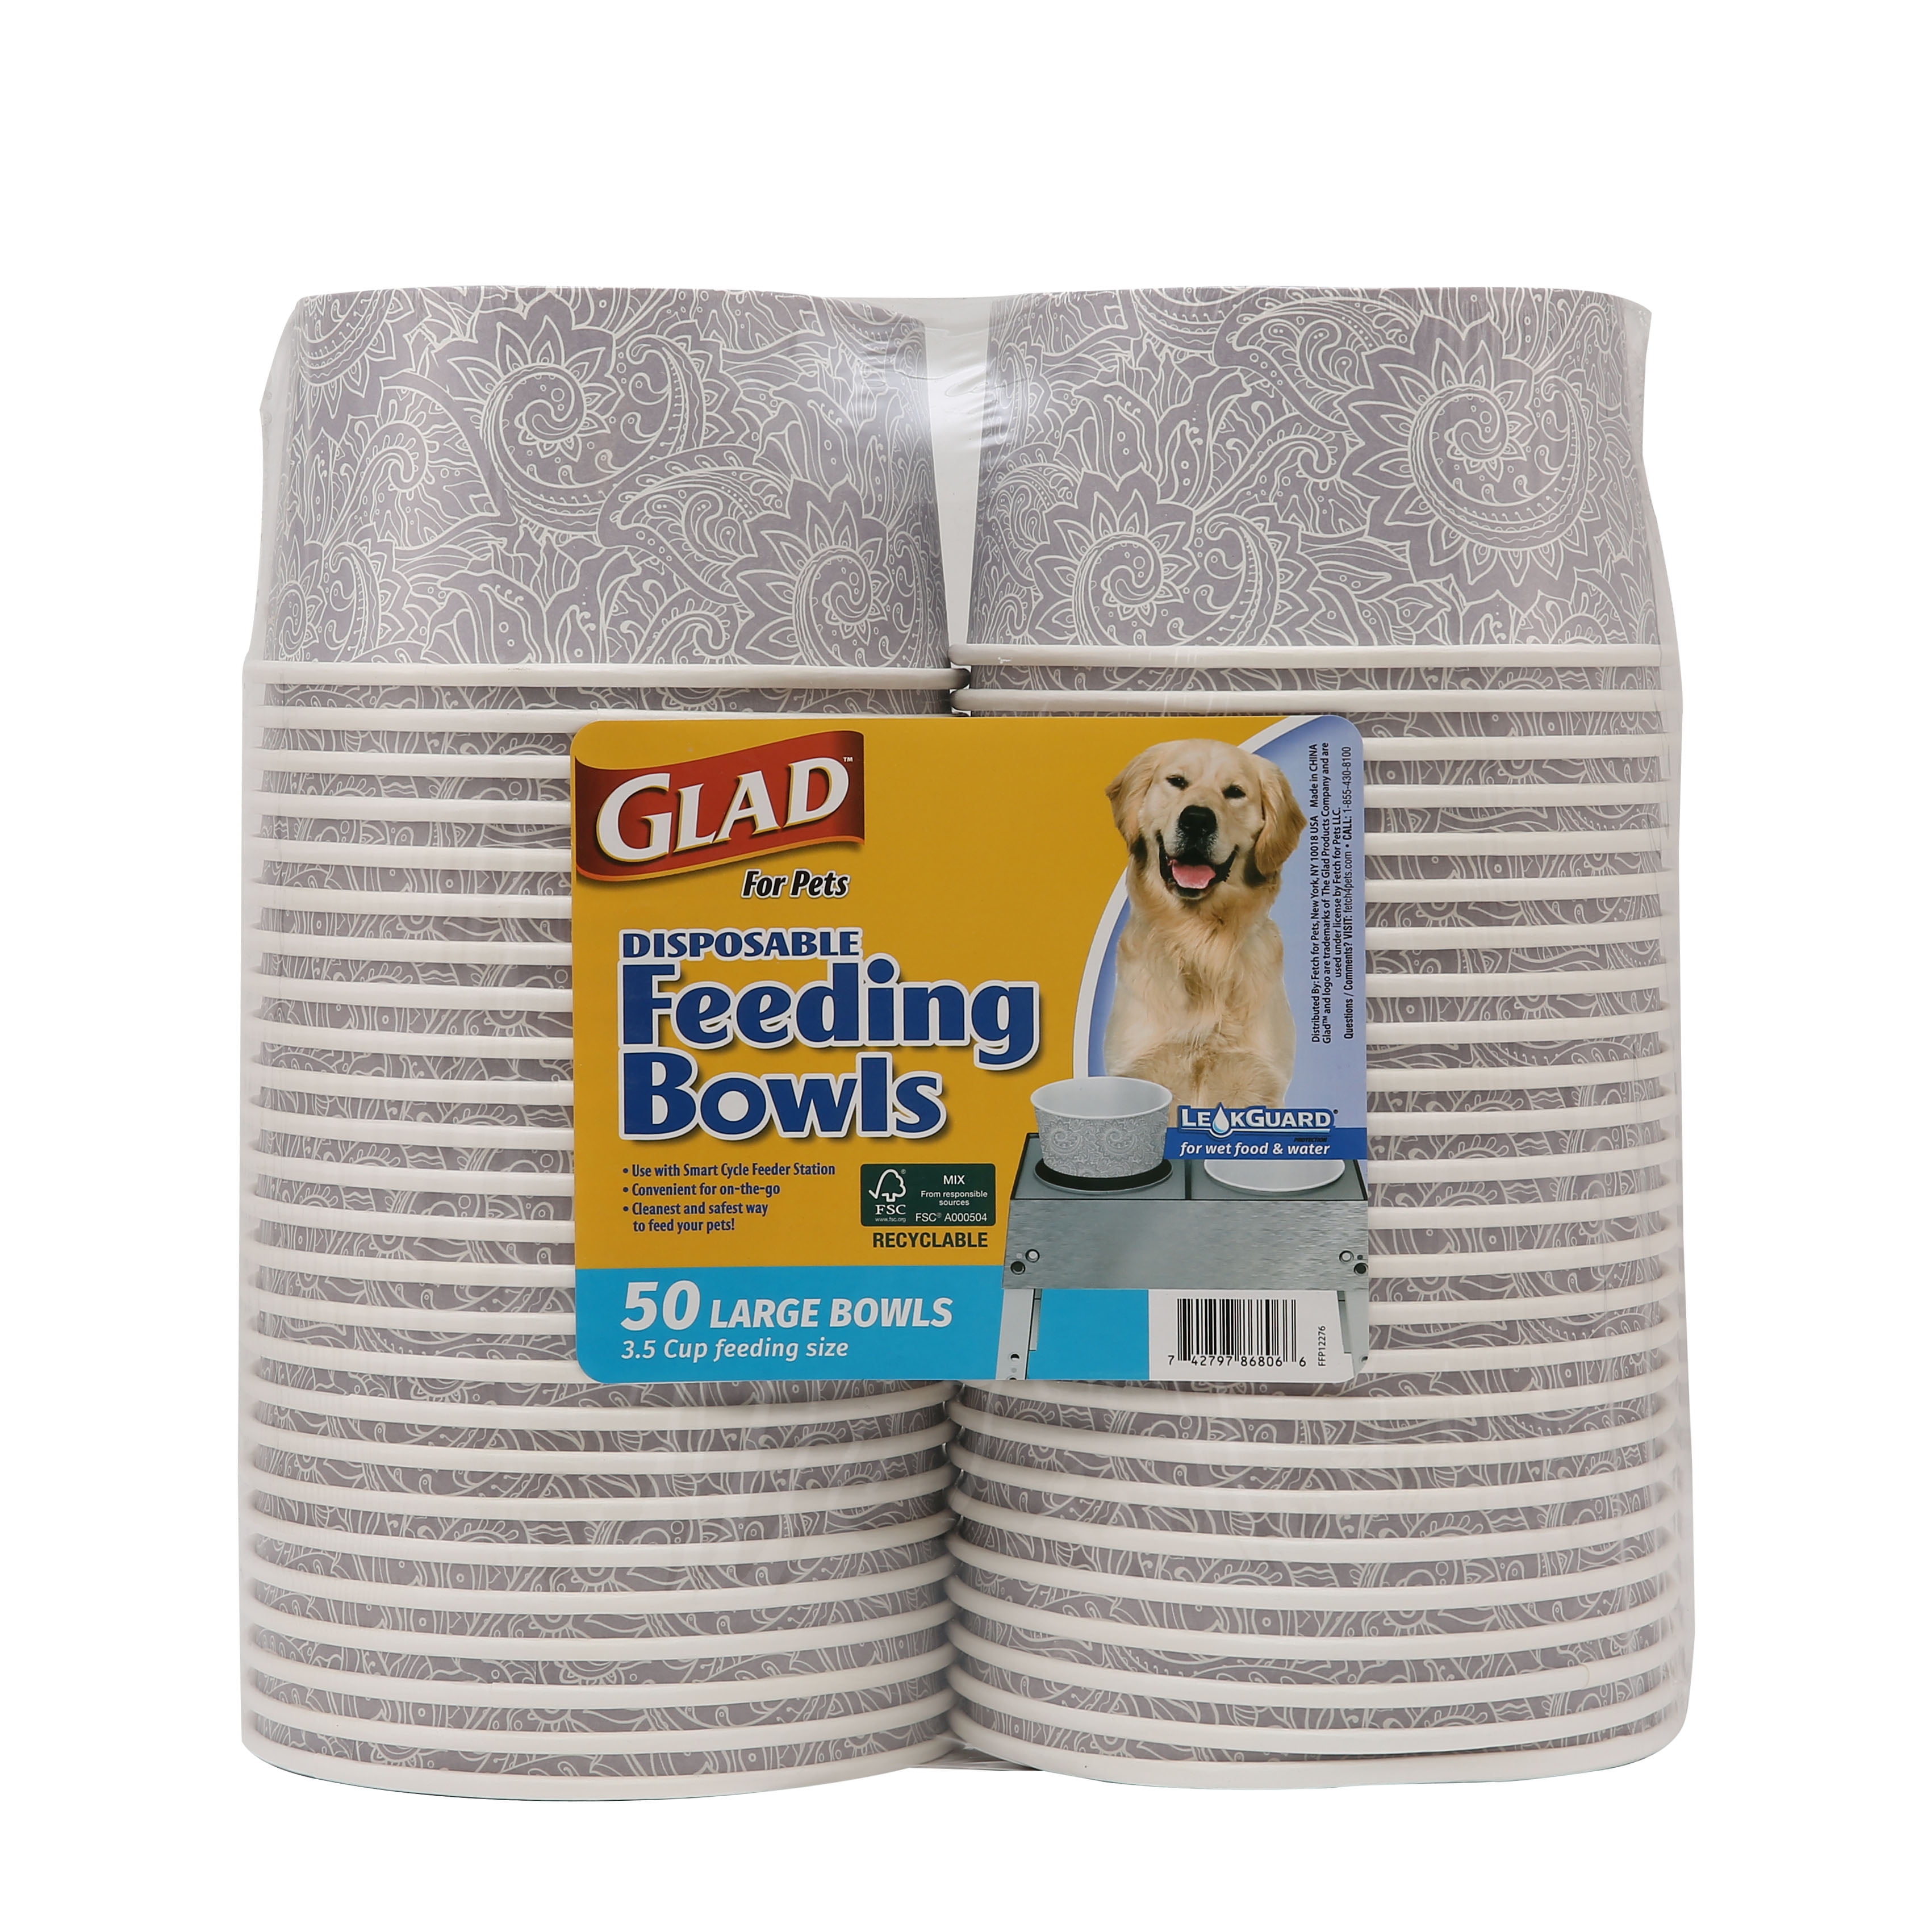 Glad for Pets Disposable Feeding Bowls